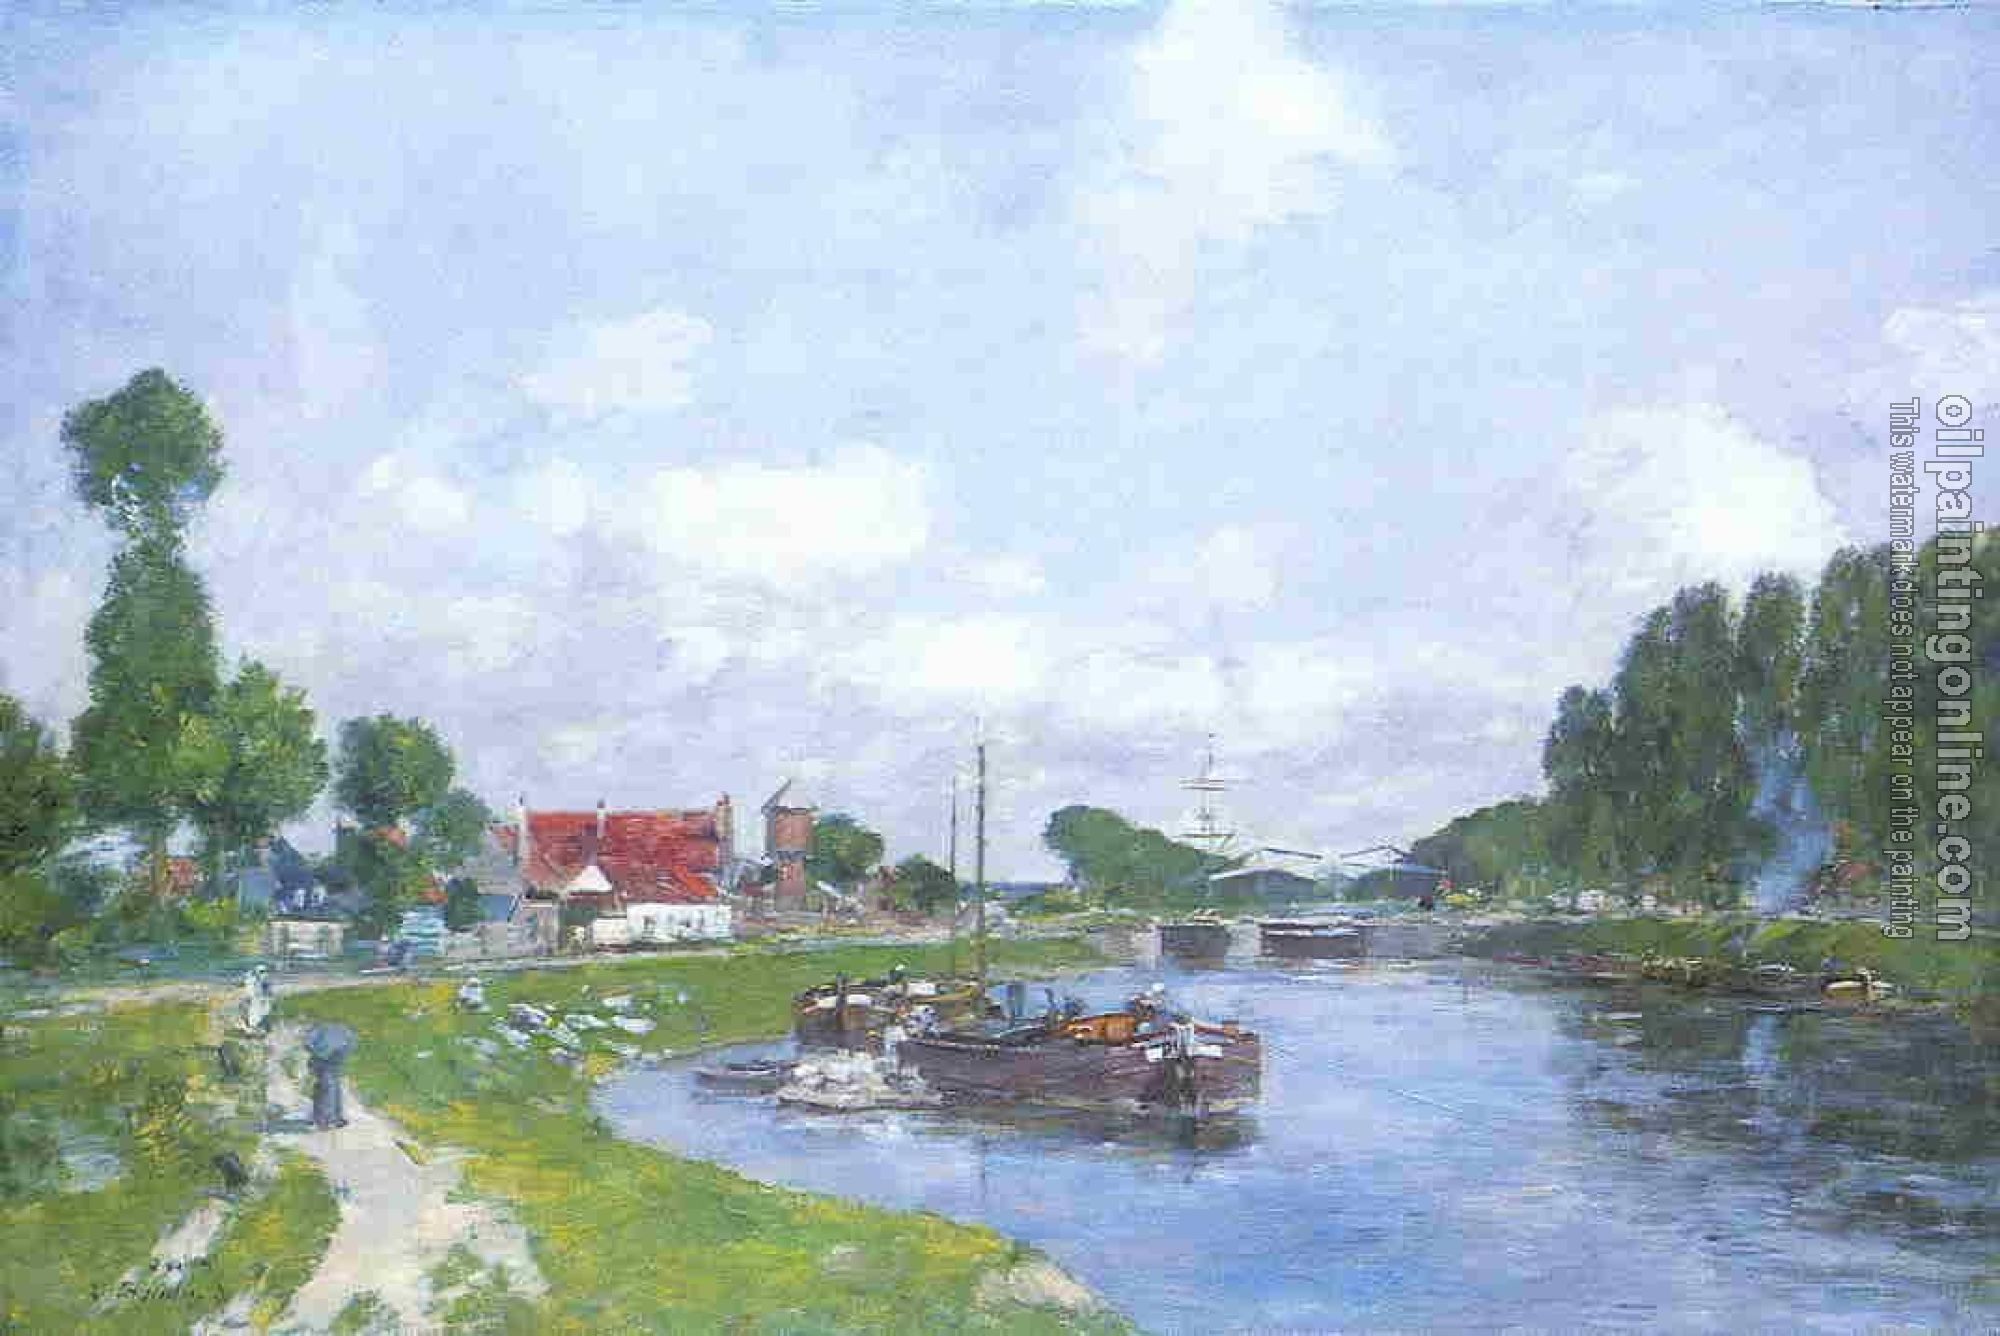 Boudin, Eugene - Barges on the Canal, Saint-Valery-sur-Somme